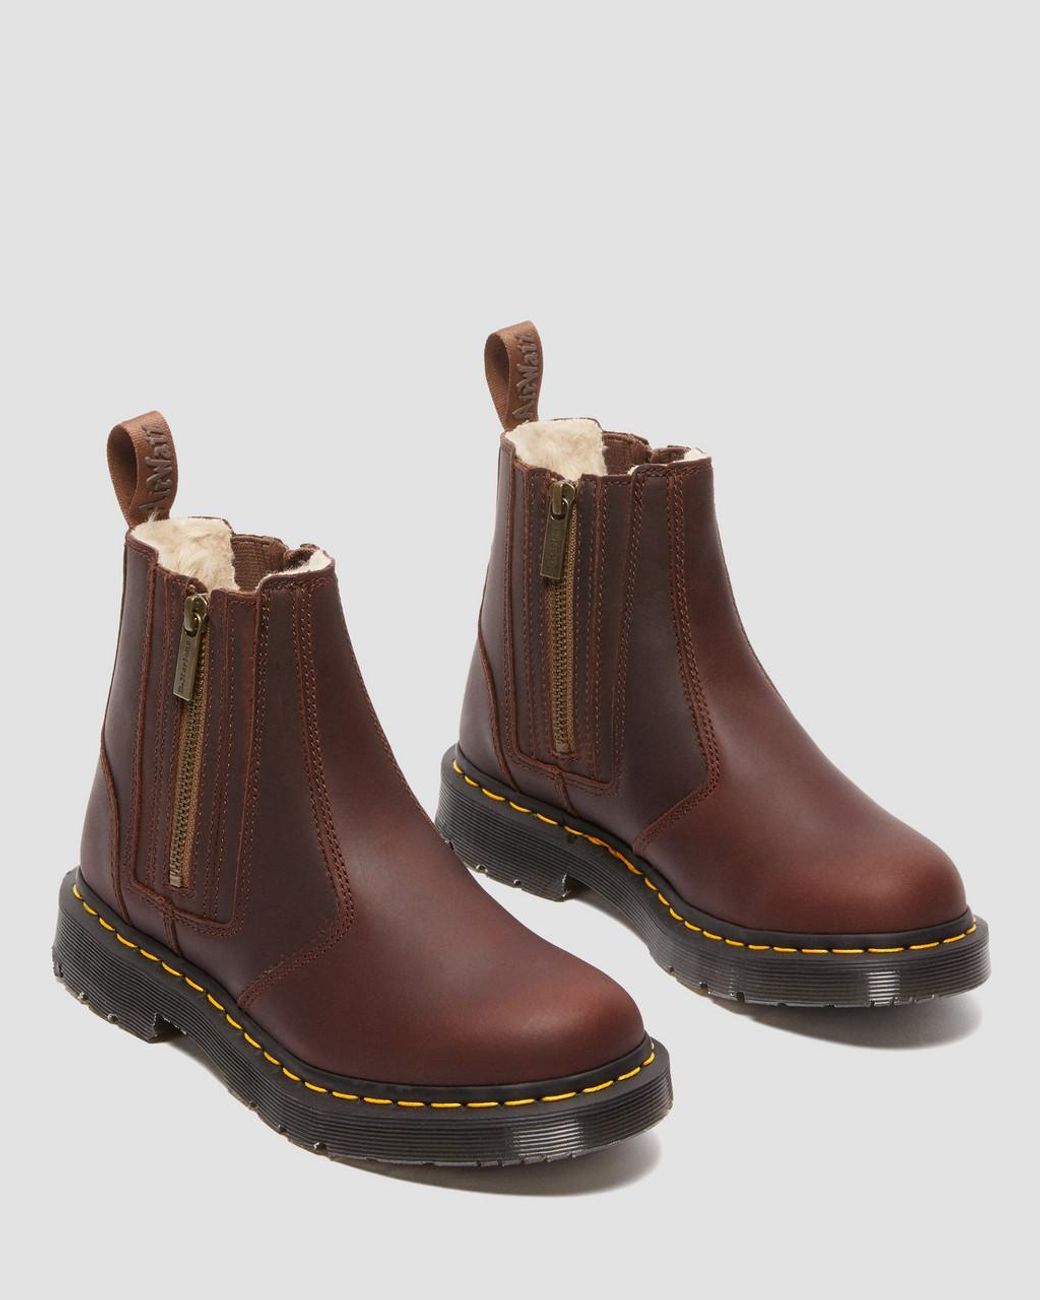 Dr. Martens Leather 2976 Alyson Dm's Wintergrip Chelsea Boots in